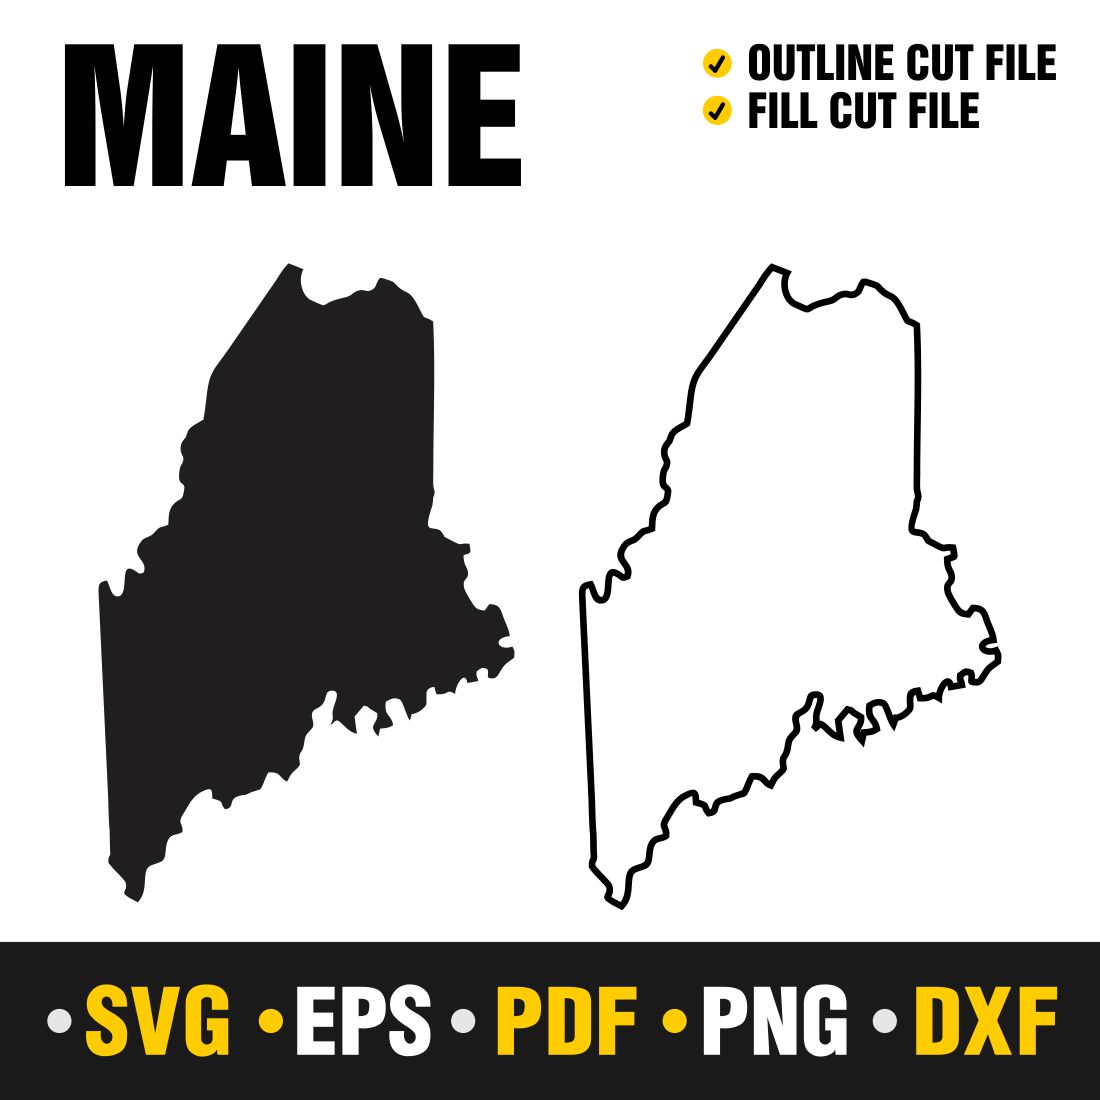 Maine SVG, PNG, PDF, EPS & DXF cover image.